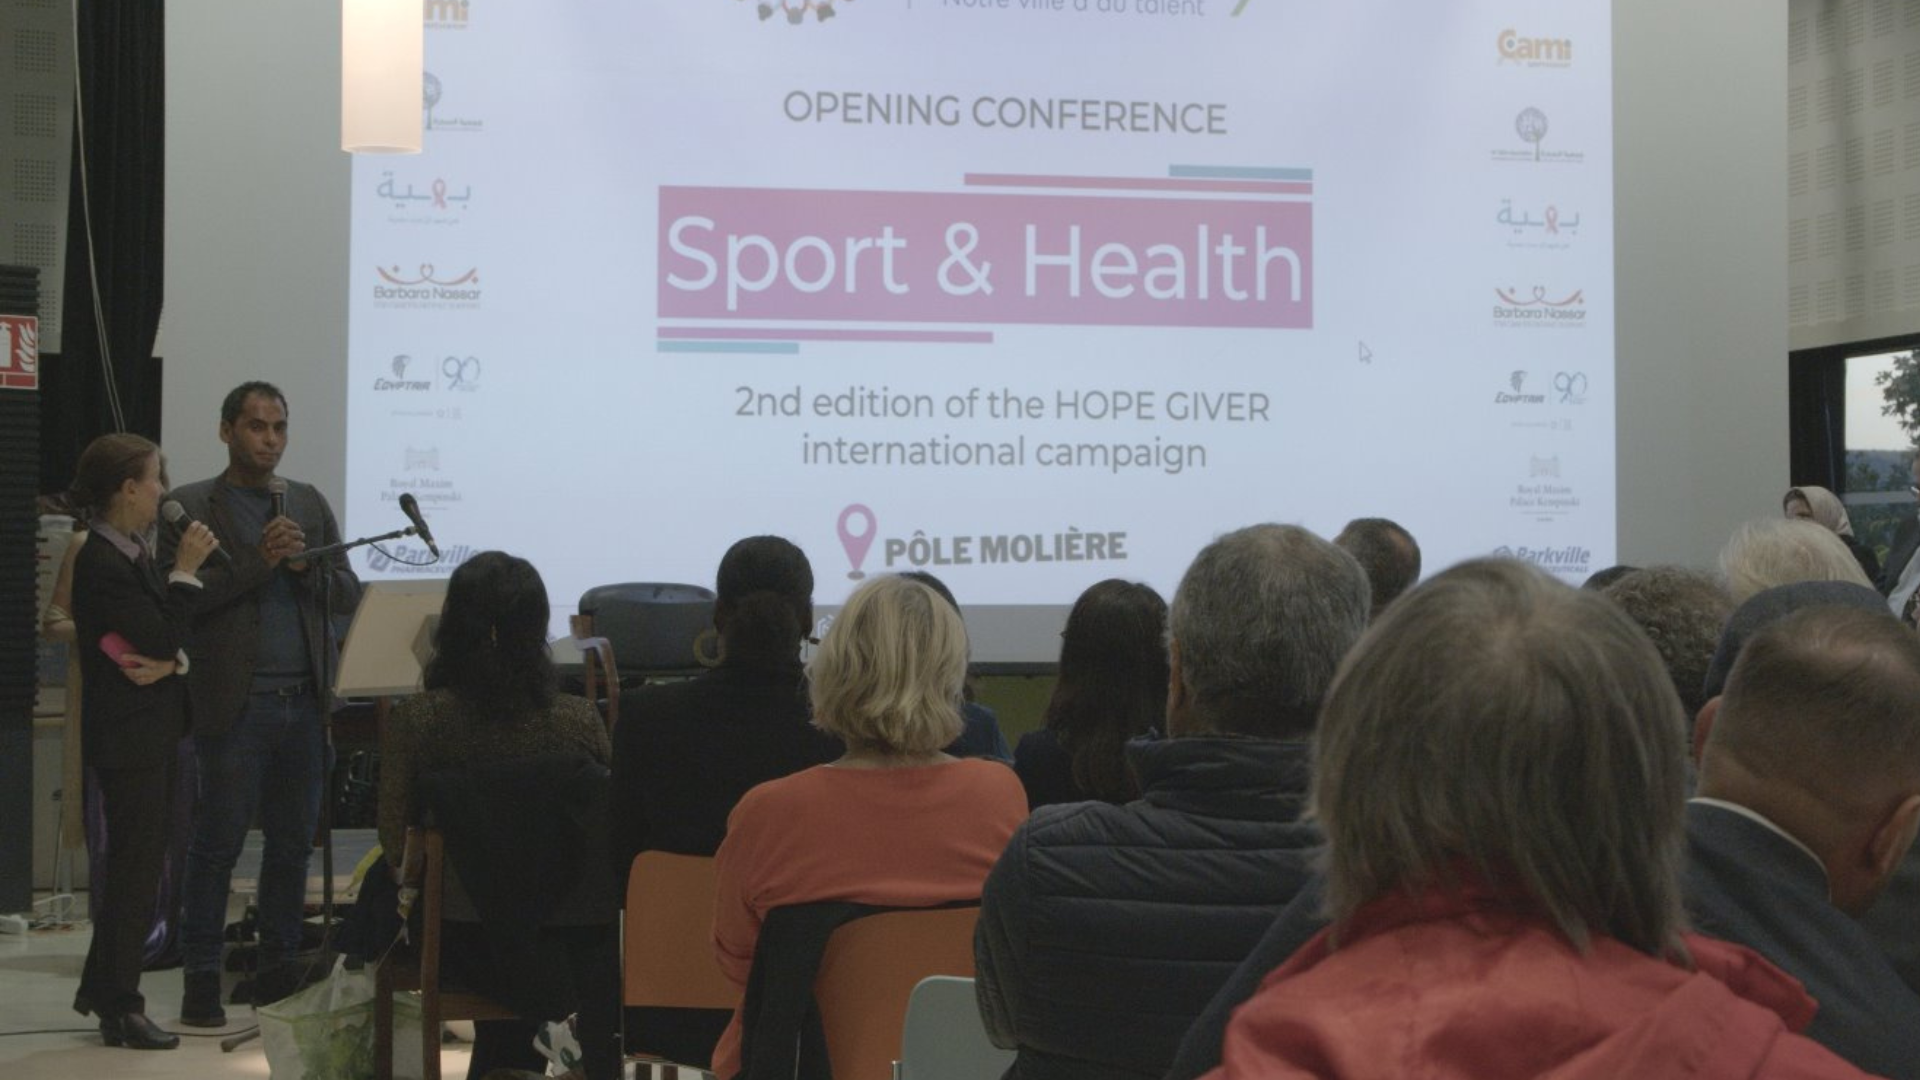 2nd edition of the International Sport & Health Conference in the city of Les Mureaux, France